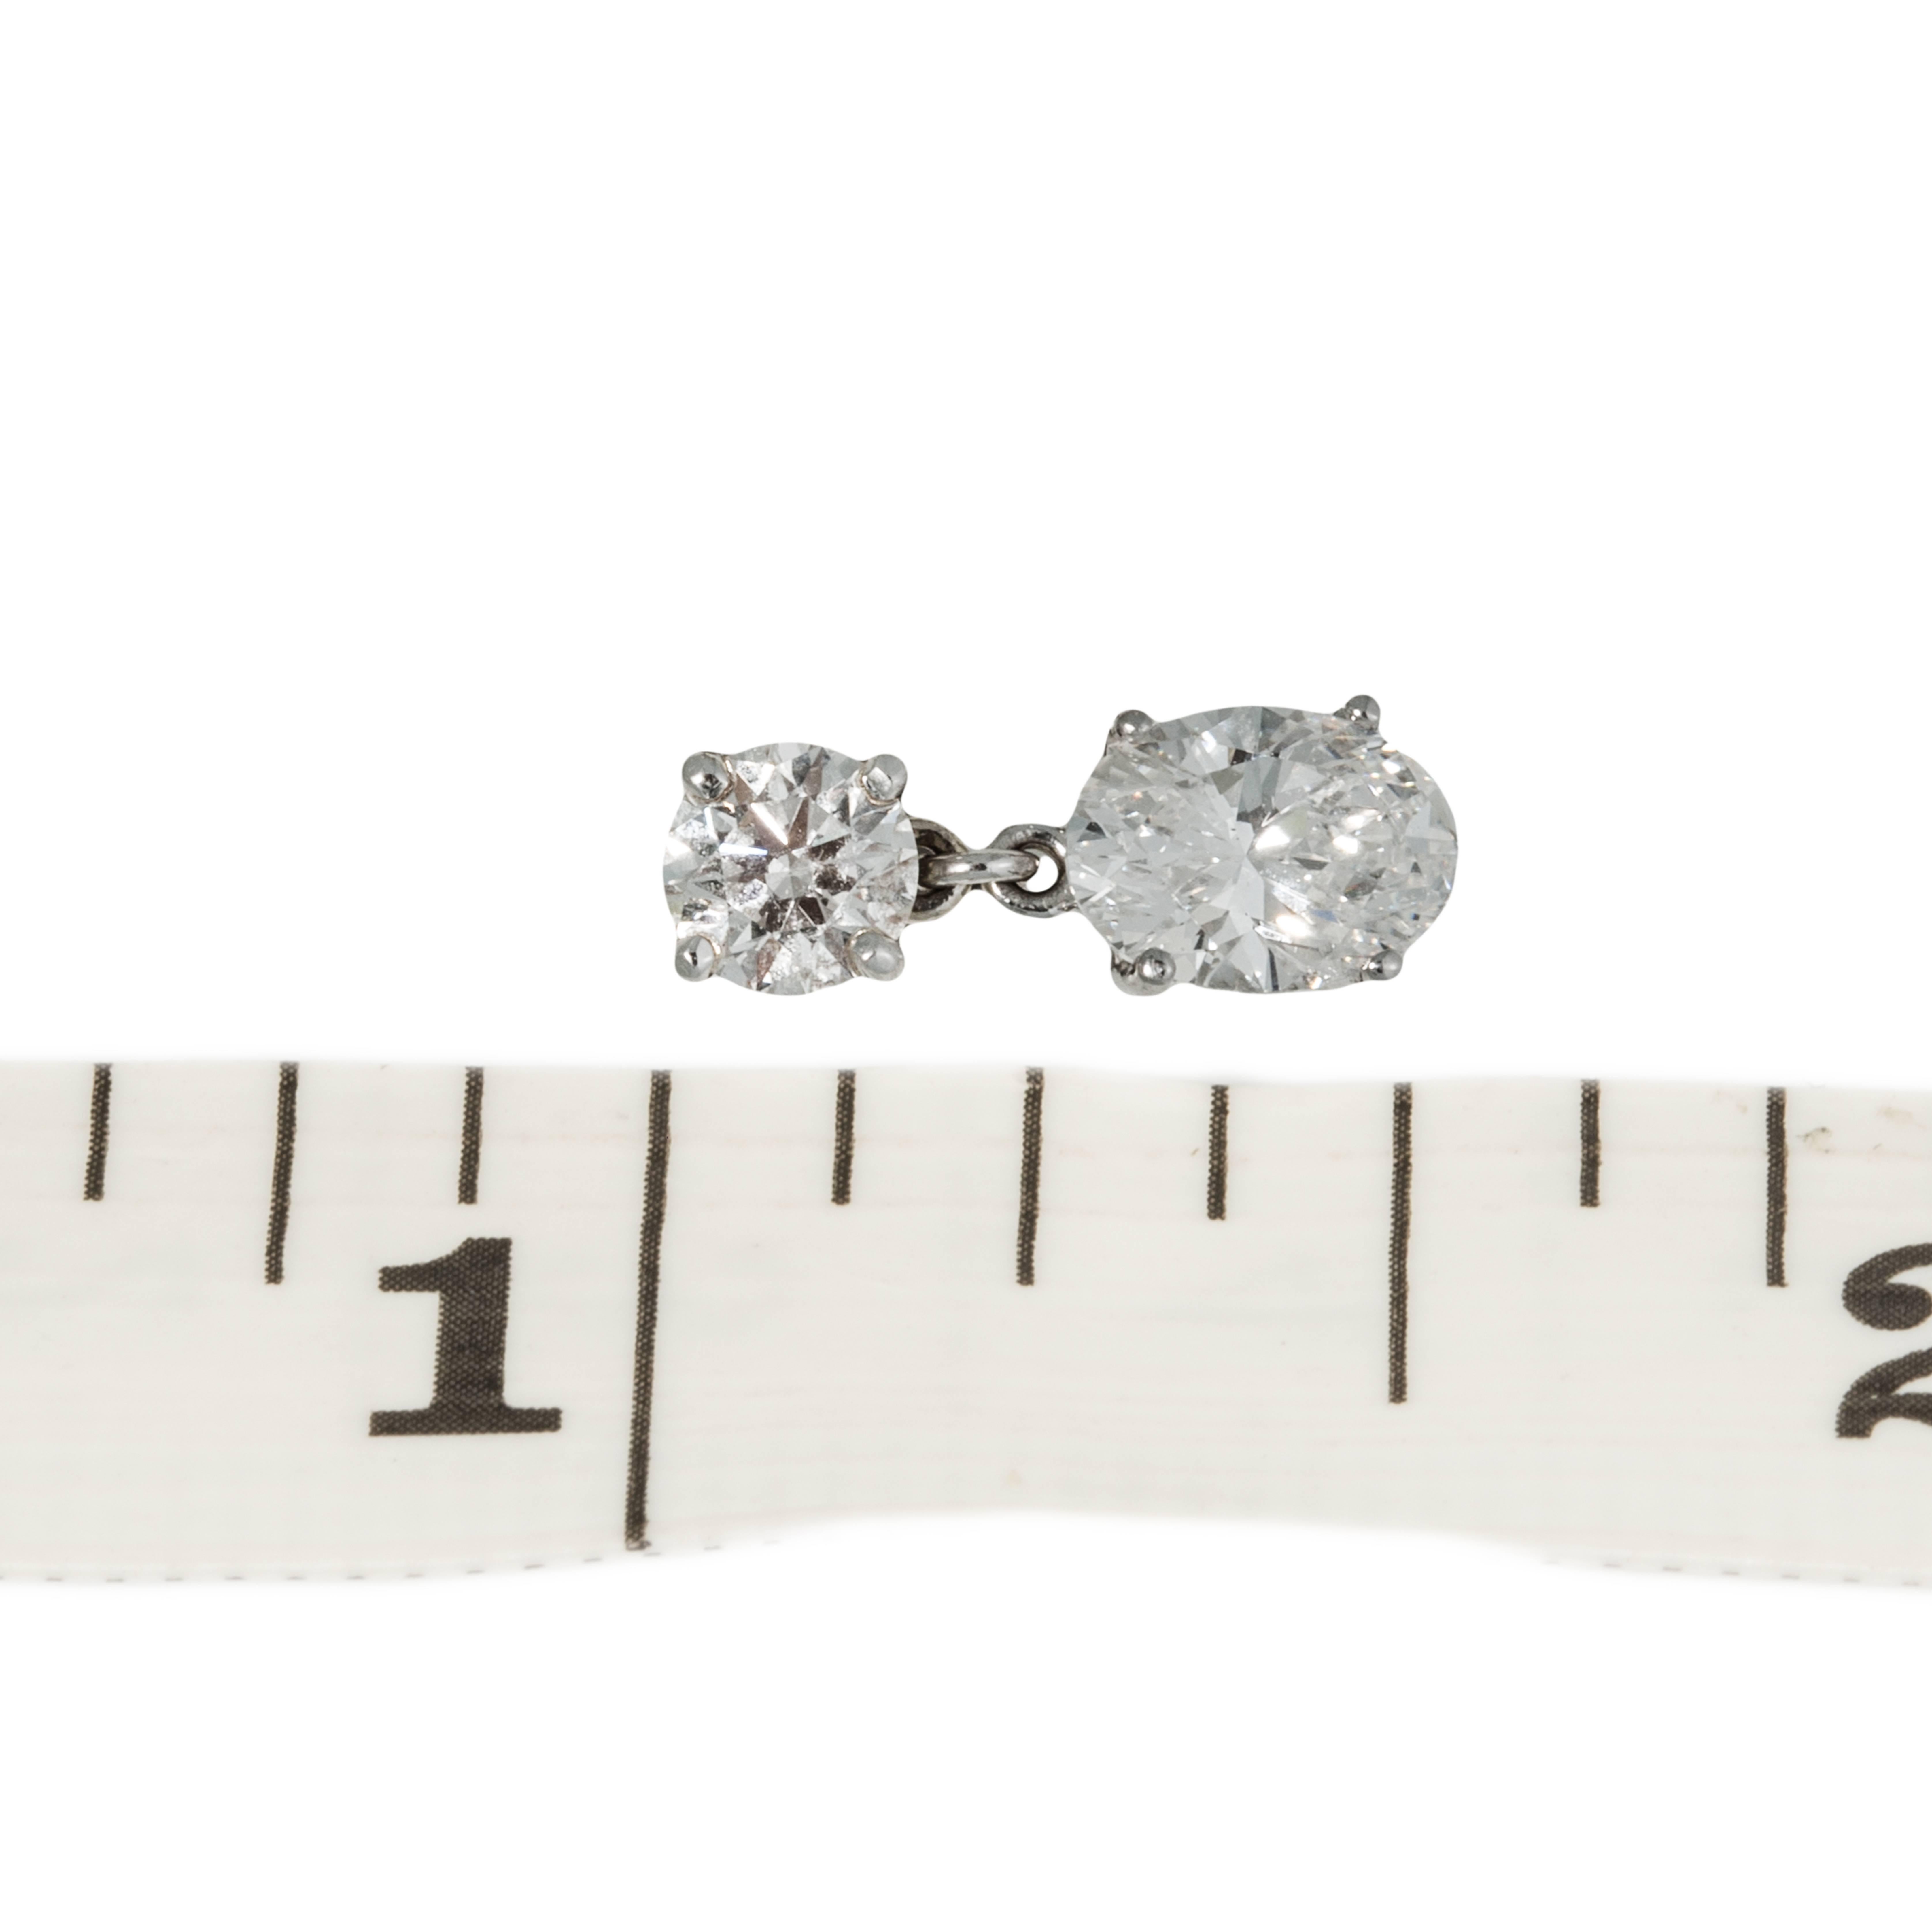 A lovely pair of 2 ct. tw. oval diamond drop earrings, F-G colour, SI2 clarity, with very good cut. They are suspended on two round, brilliant cut diamonds, weighing .85. ct. tw. F-G colour SI1-SI2 clarity, with very good cut also. These earrings